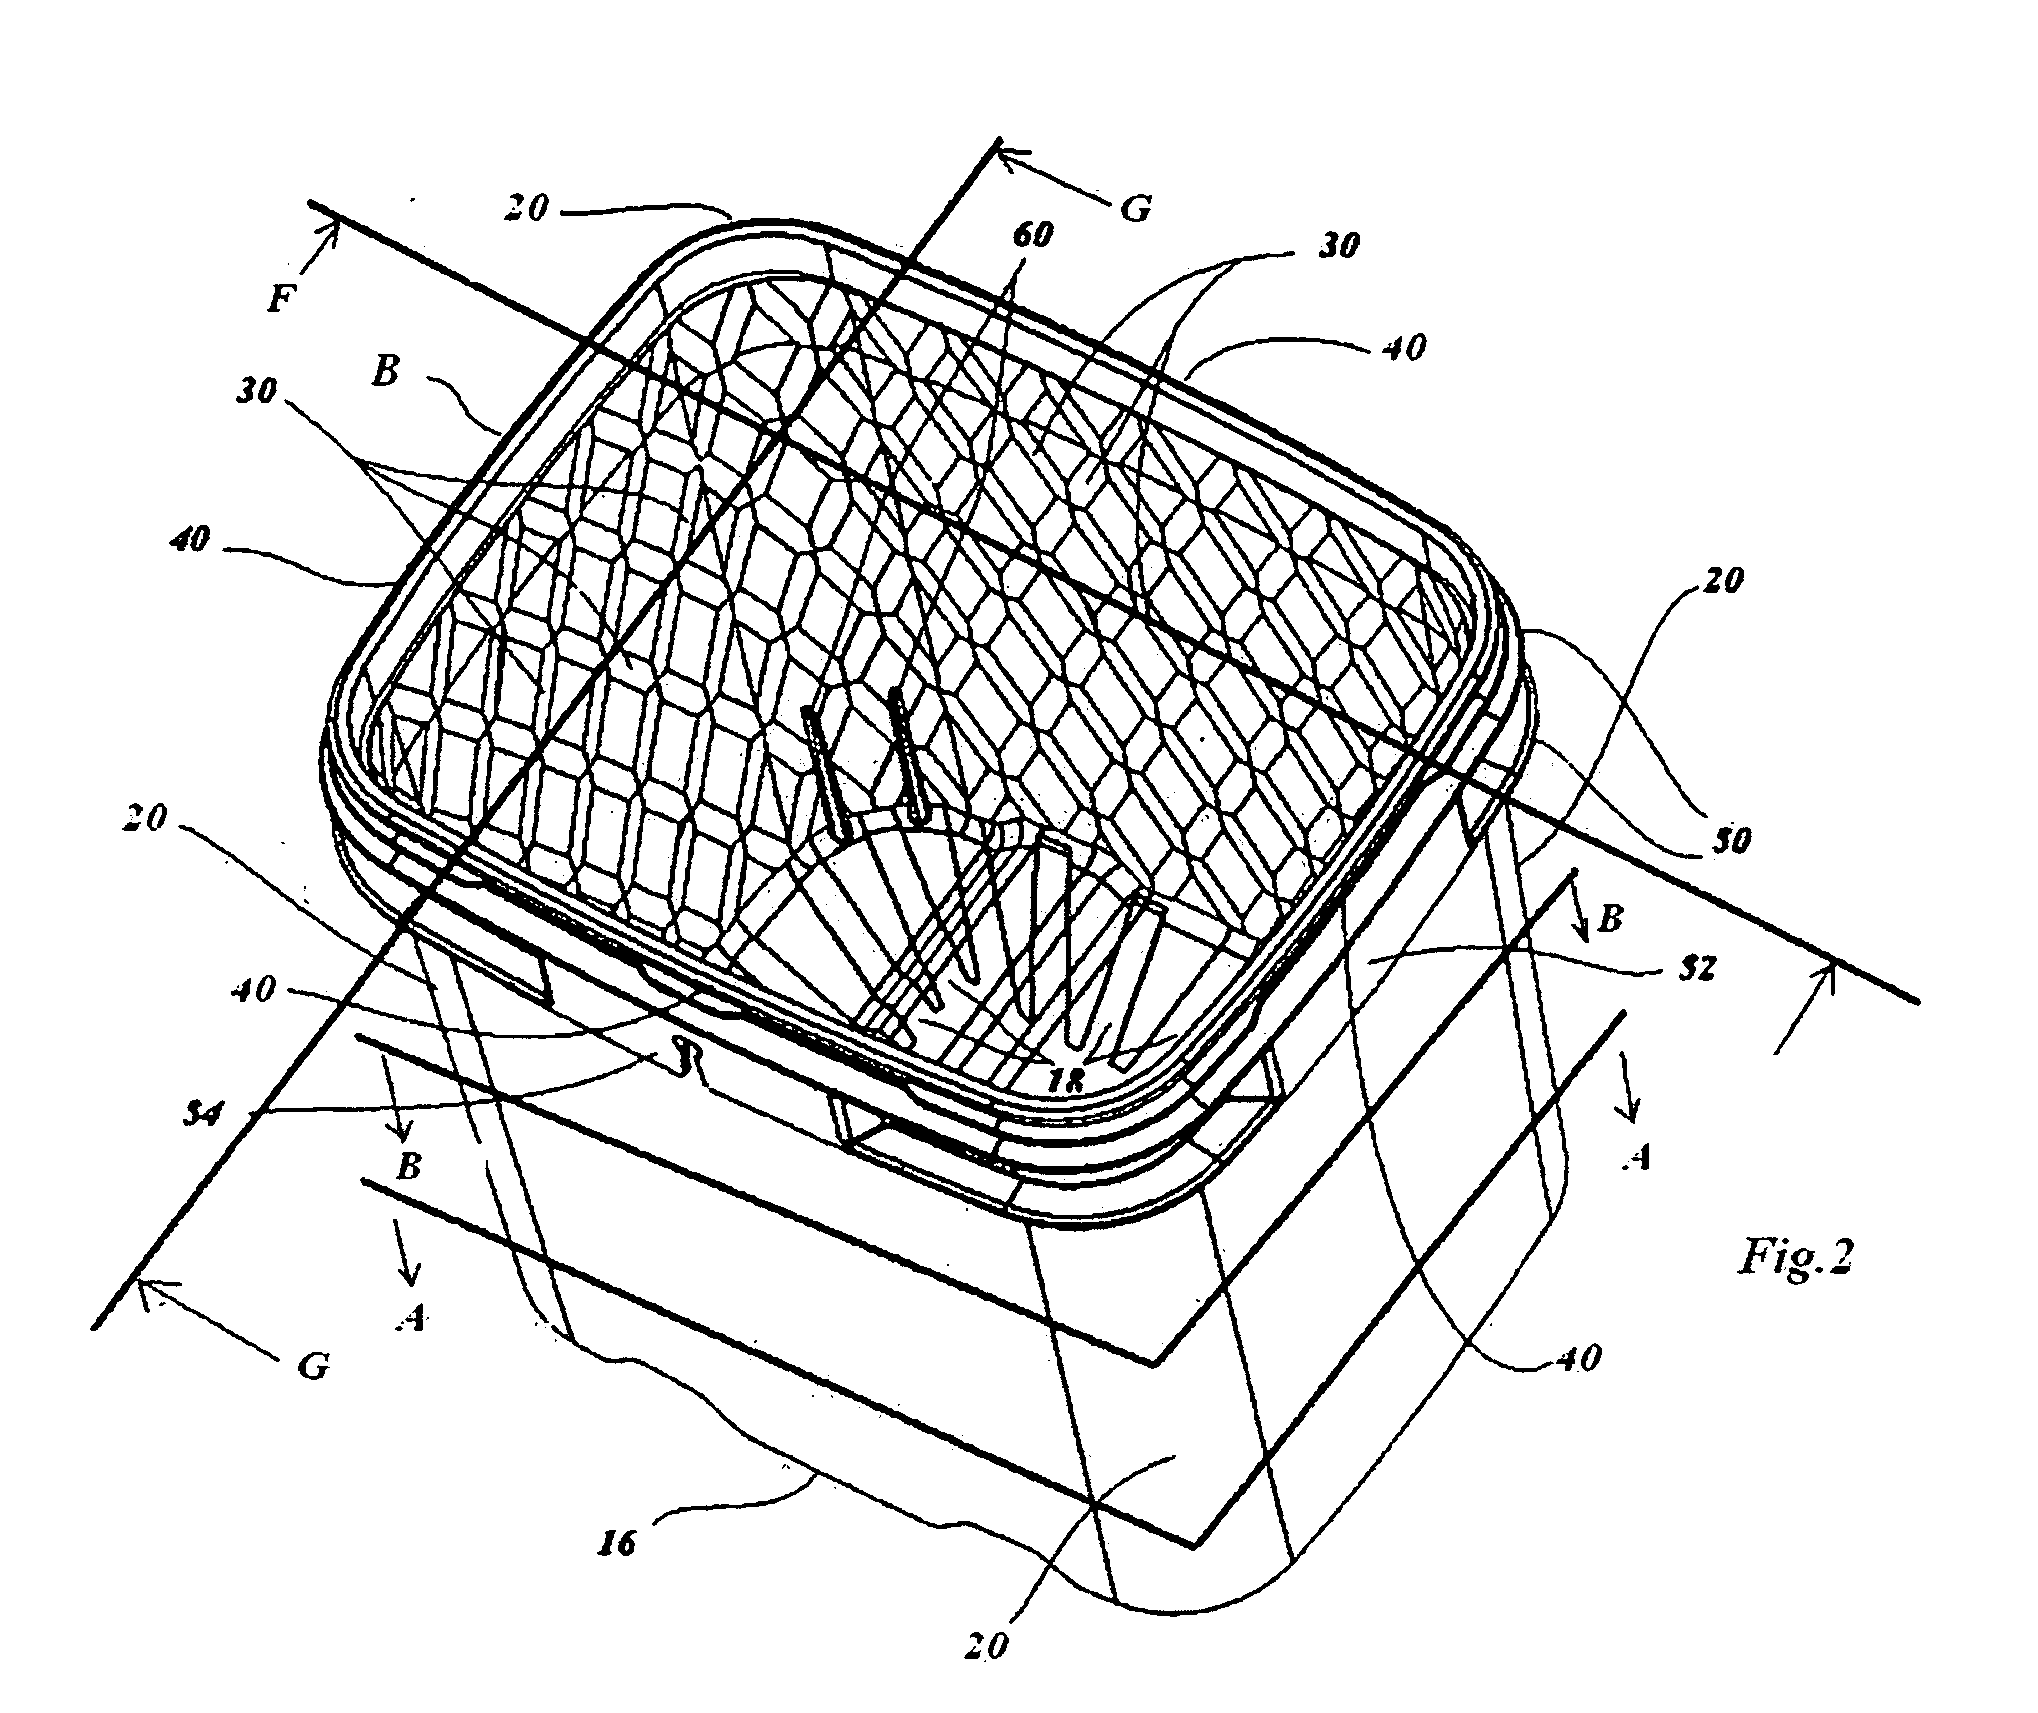 Container apparatus and related methods